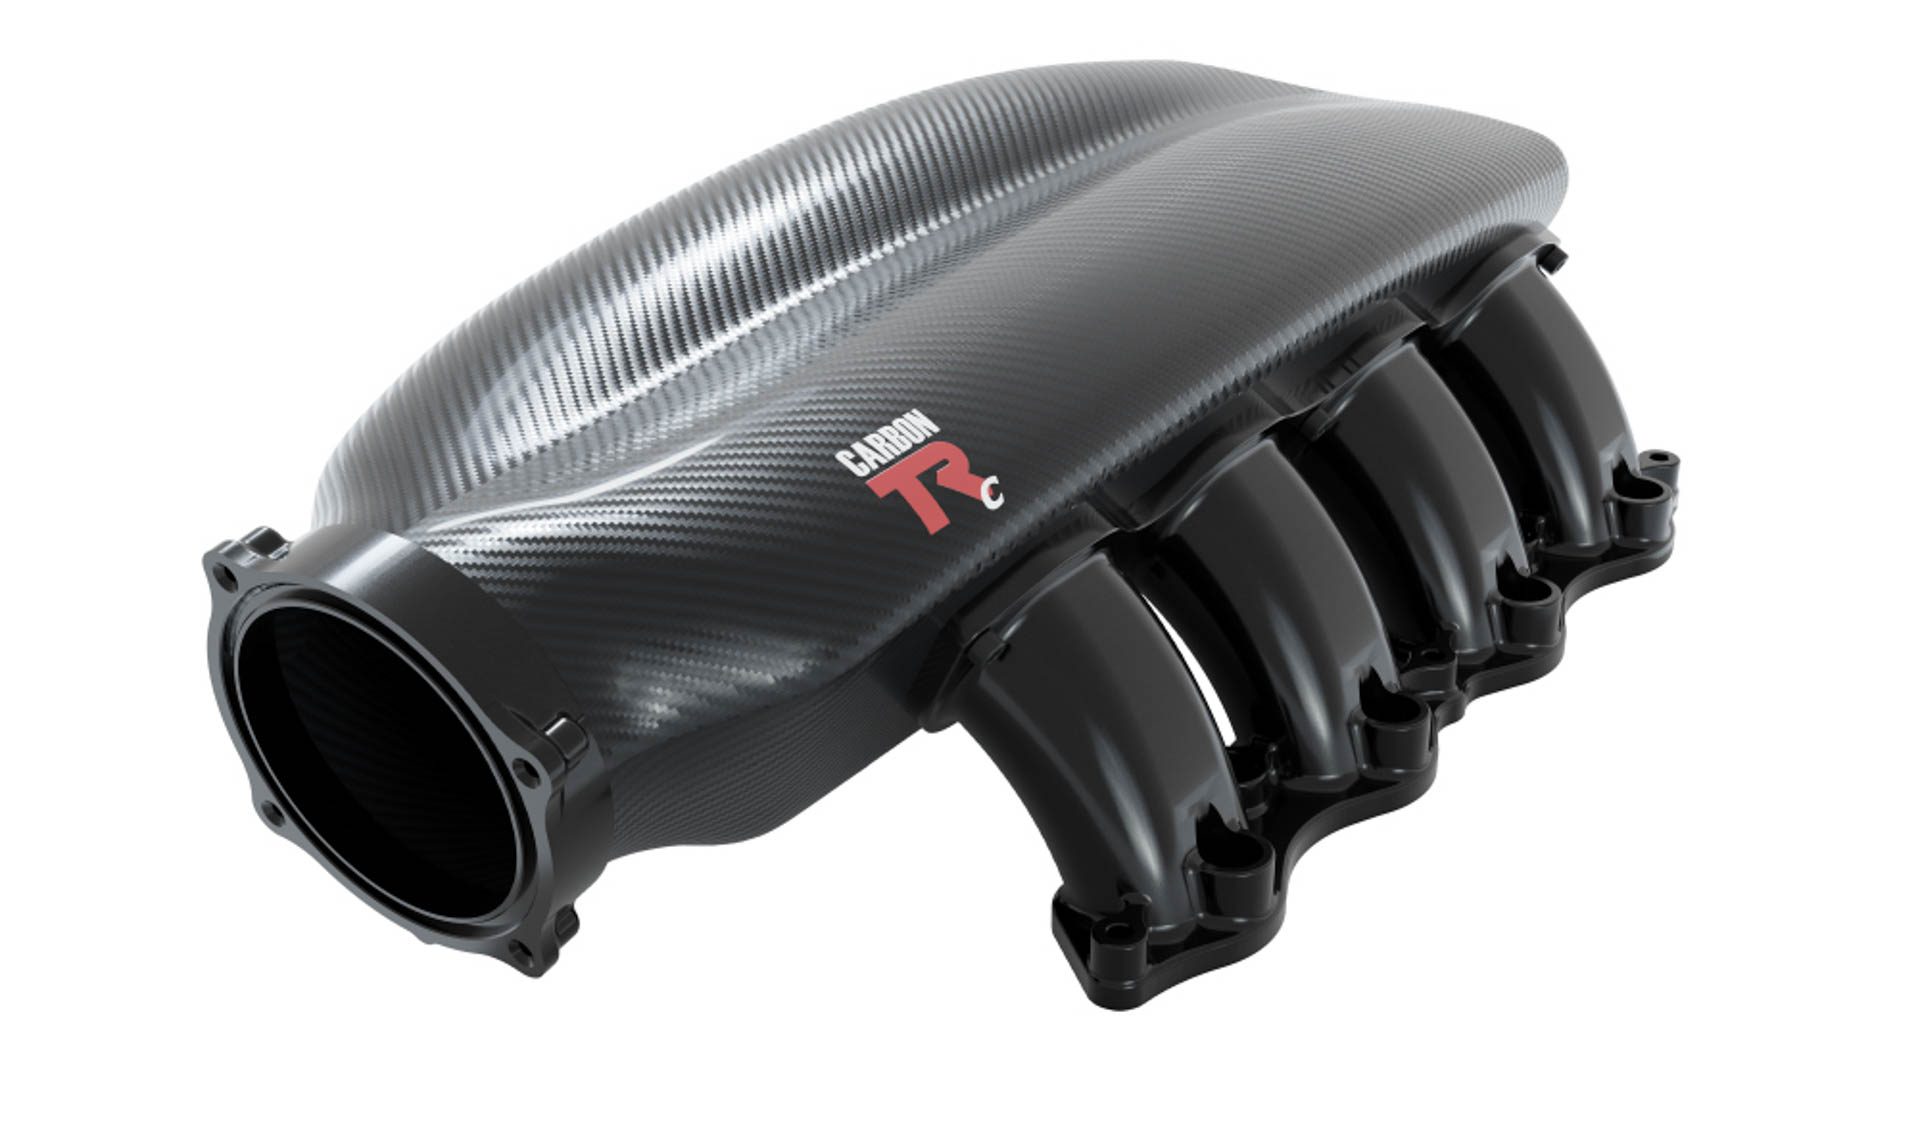 Carbon TRc Intake Manifold for Ford, GM and Mopar